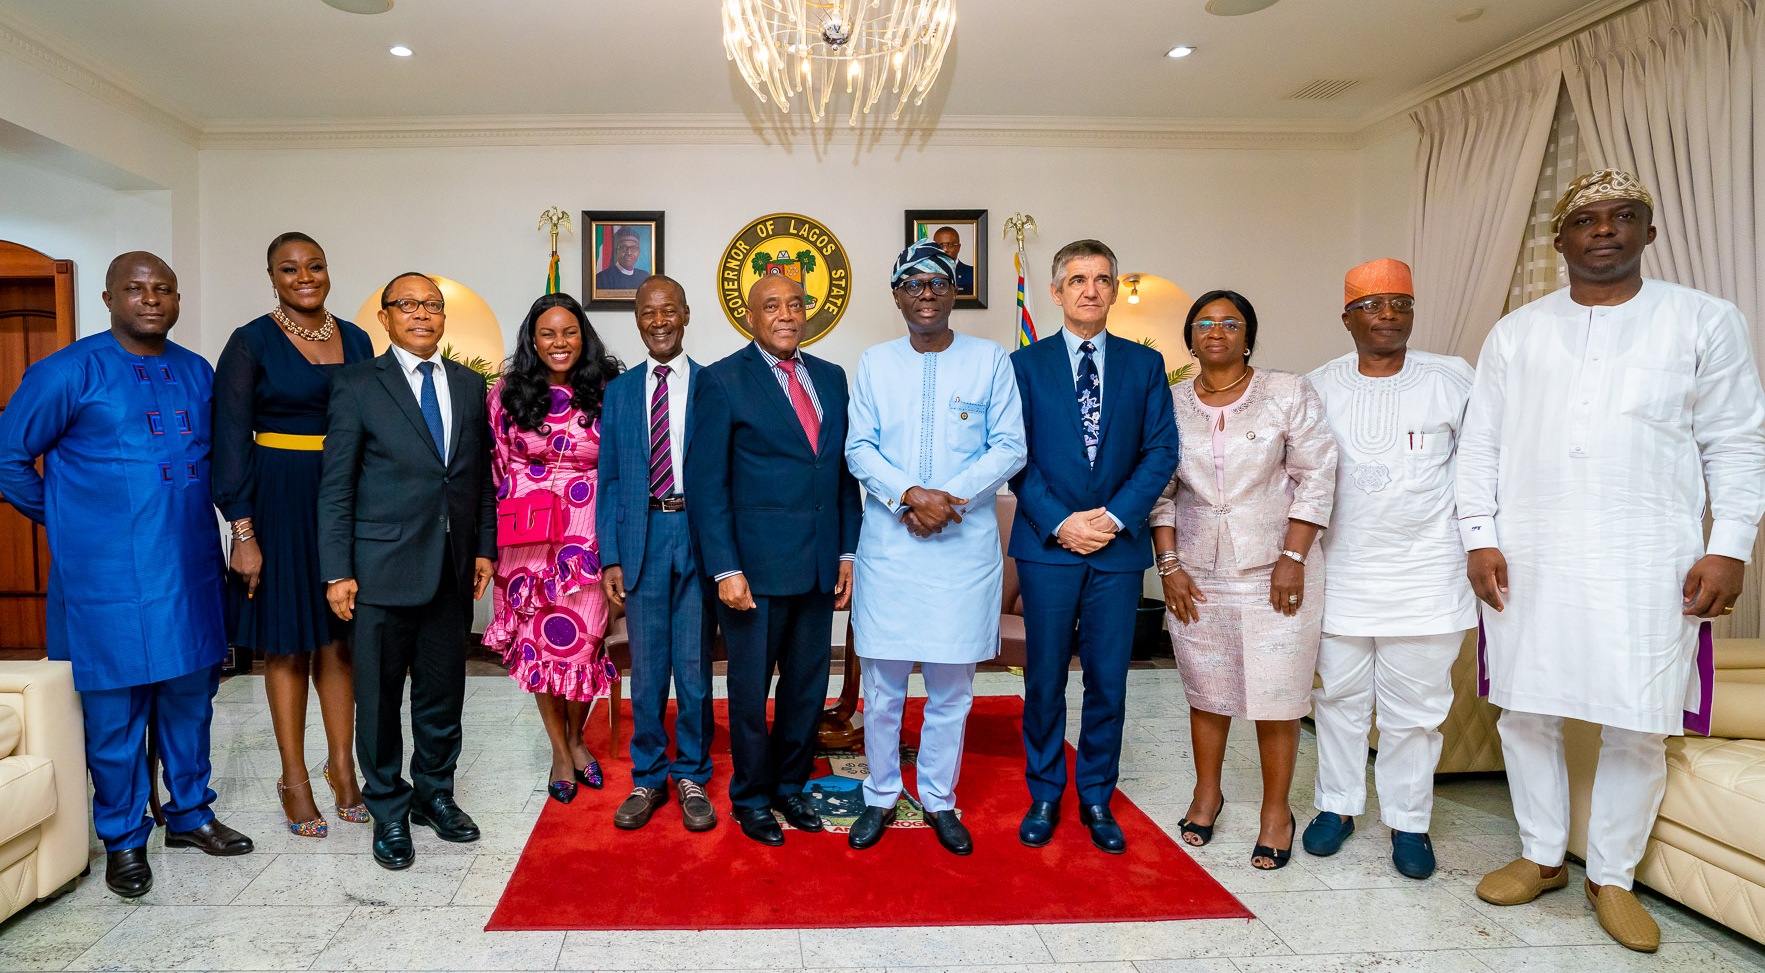 PICTURES: GOV. SANWO-OLU RECEIVES EXECUTIVE MANAGEMENT OF DANGOTE CEMENT PLC AT LAGOS HOUSE, MARINA, ON WEDNESDAY, MARCH 18, 2020